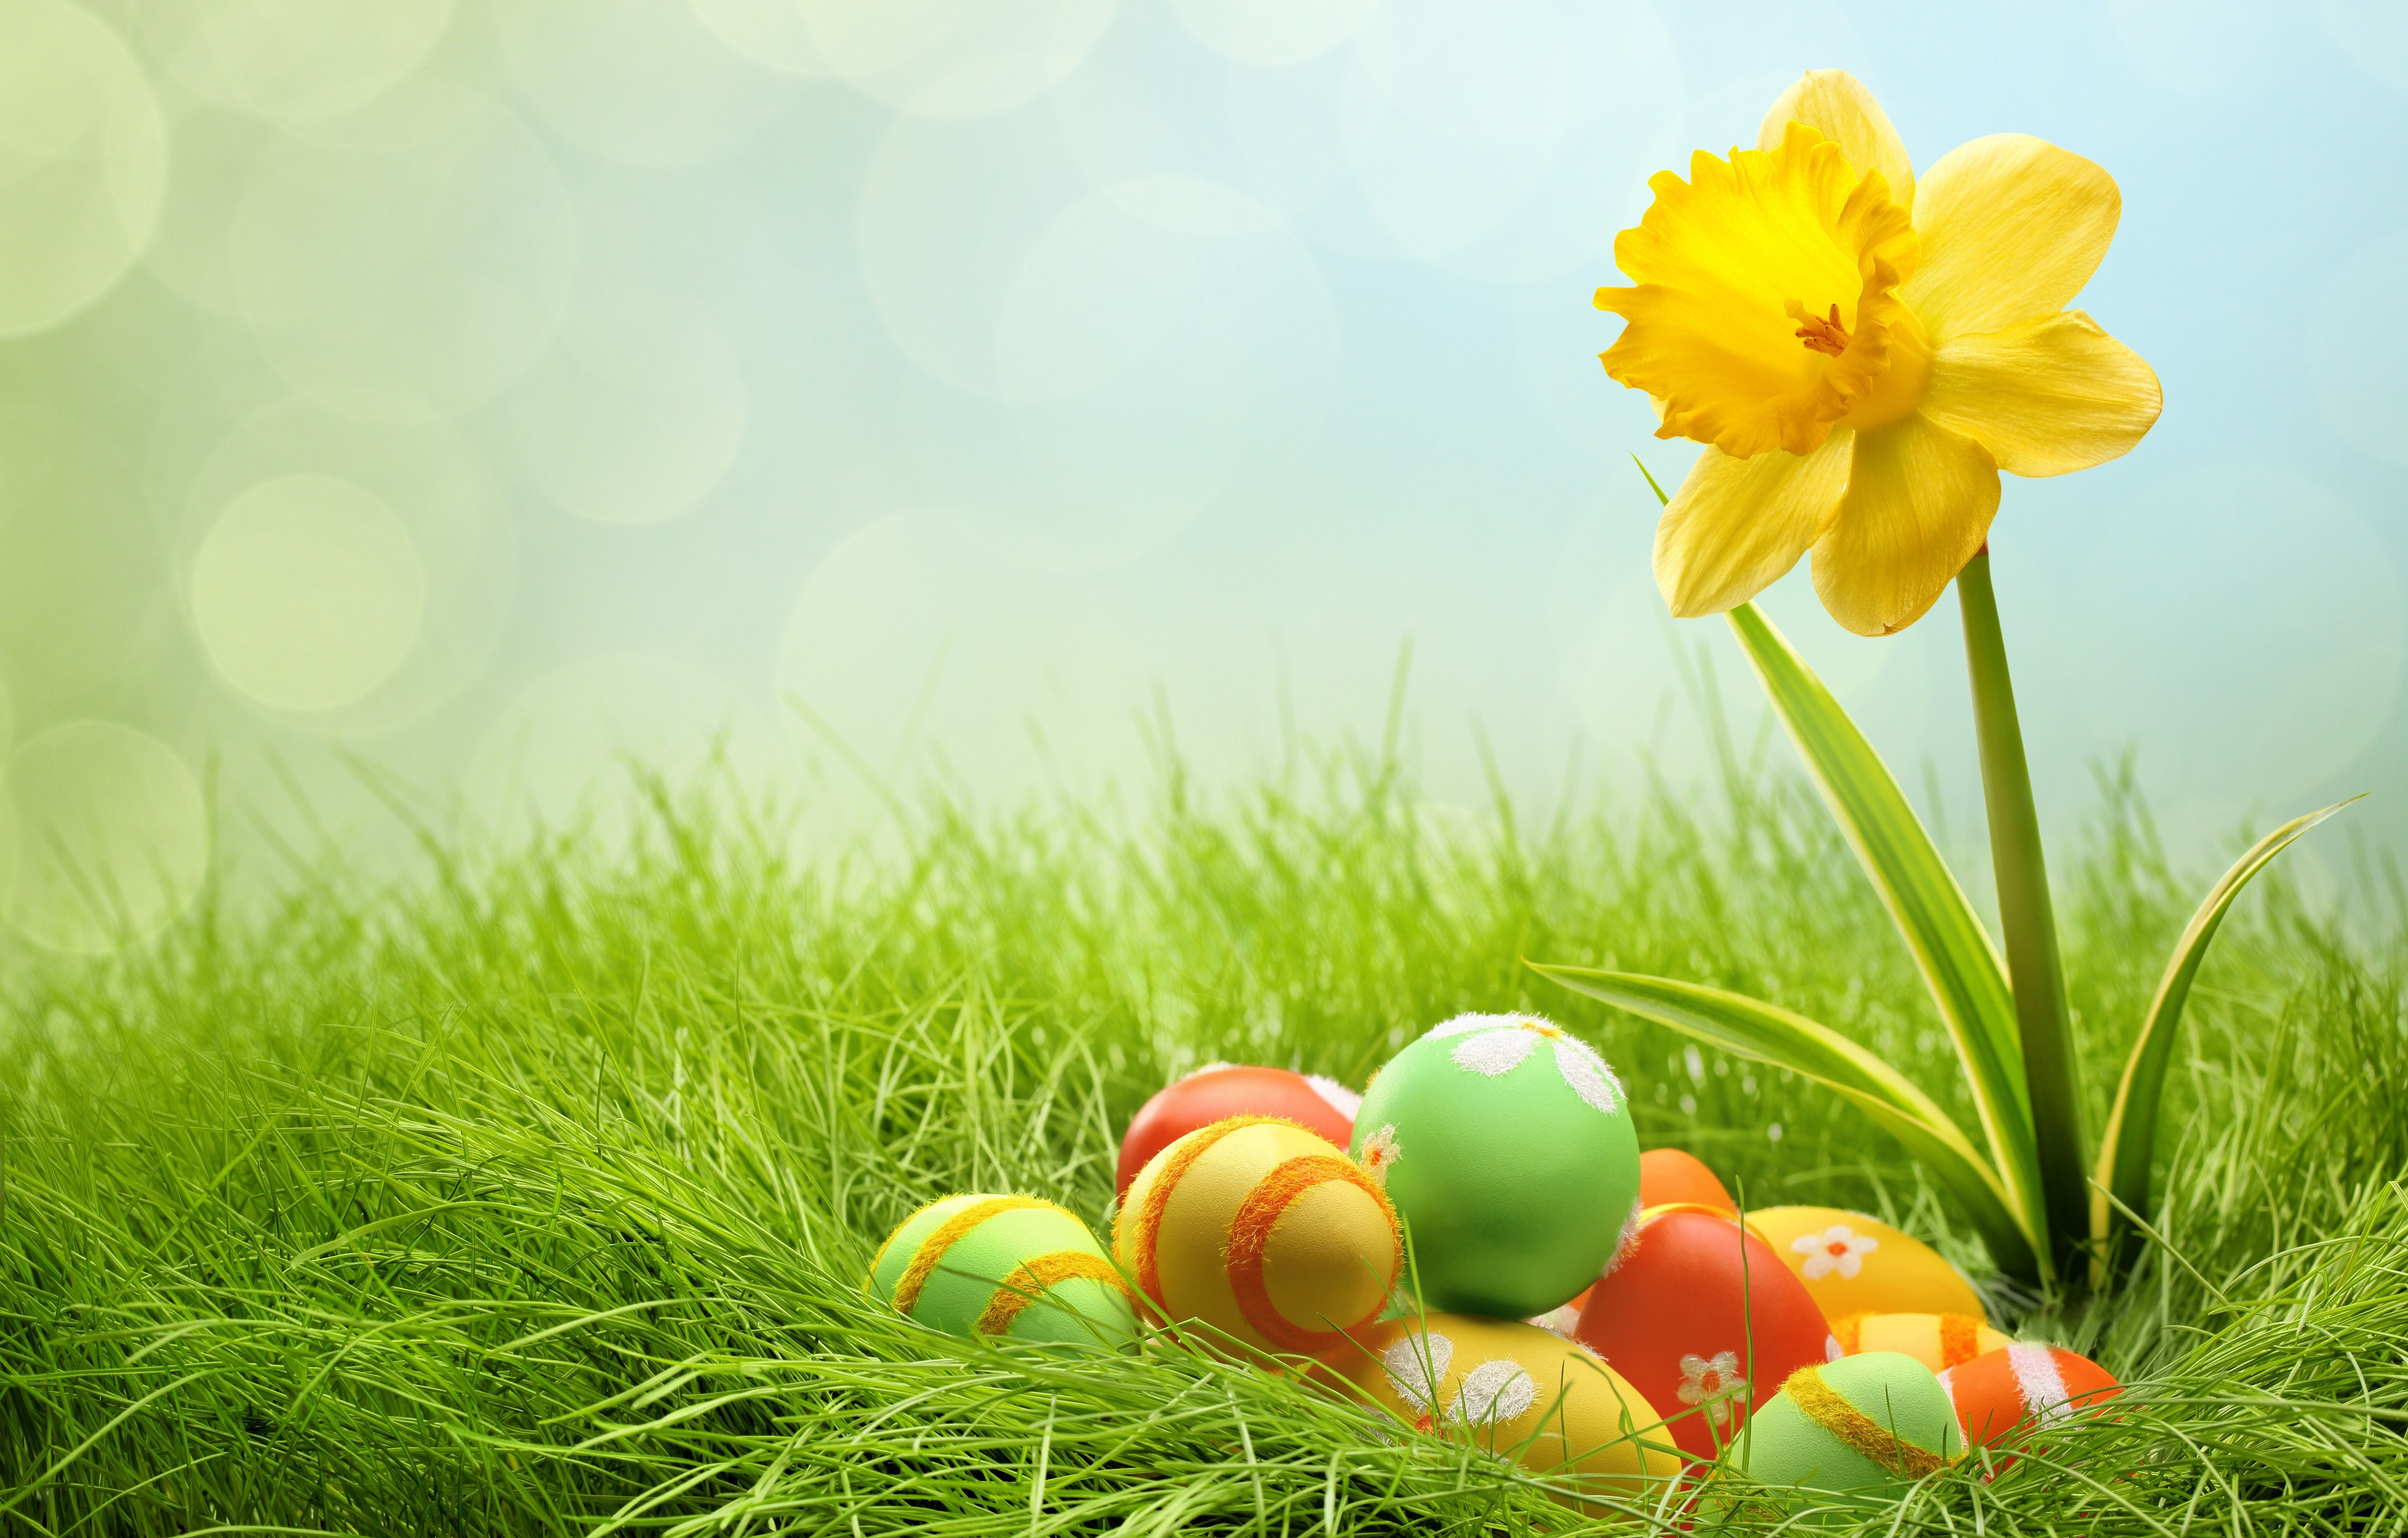 20 Excellent desktop backgrounds easter You Can Download It At No Cost